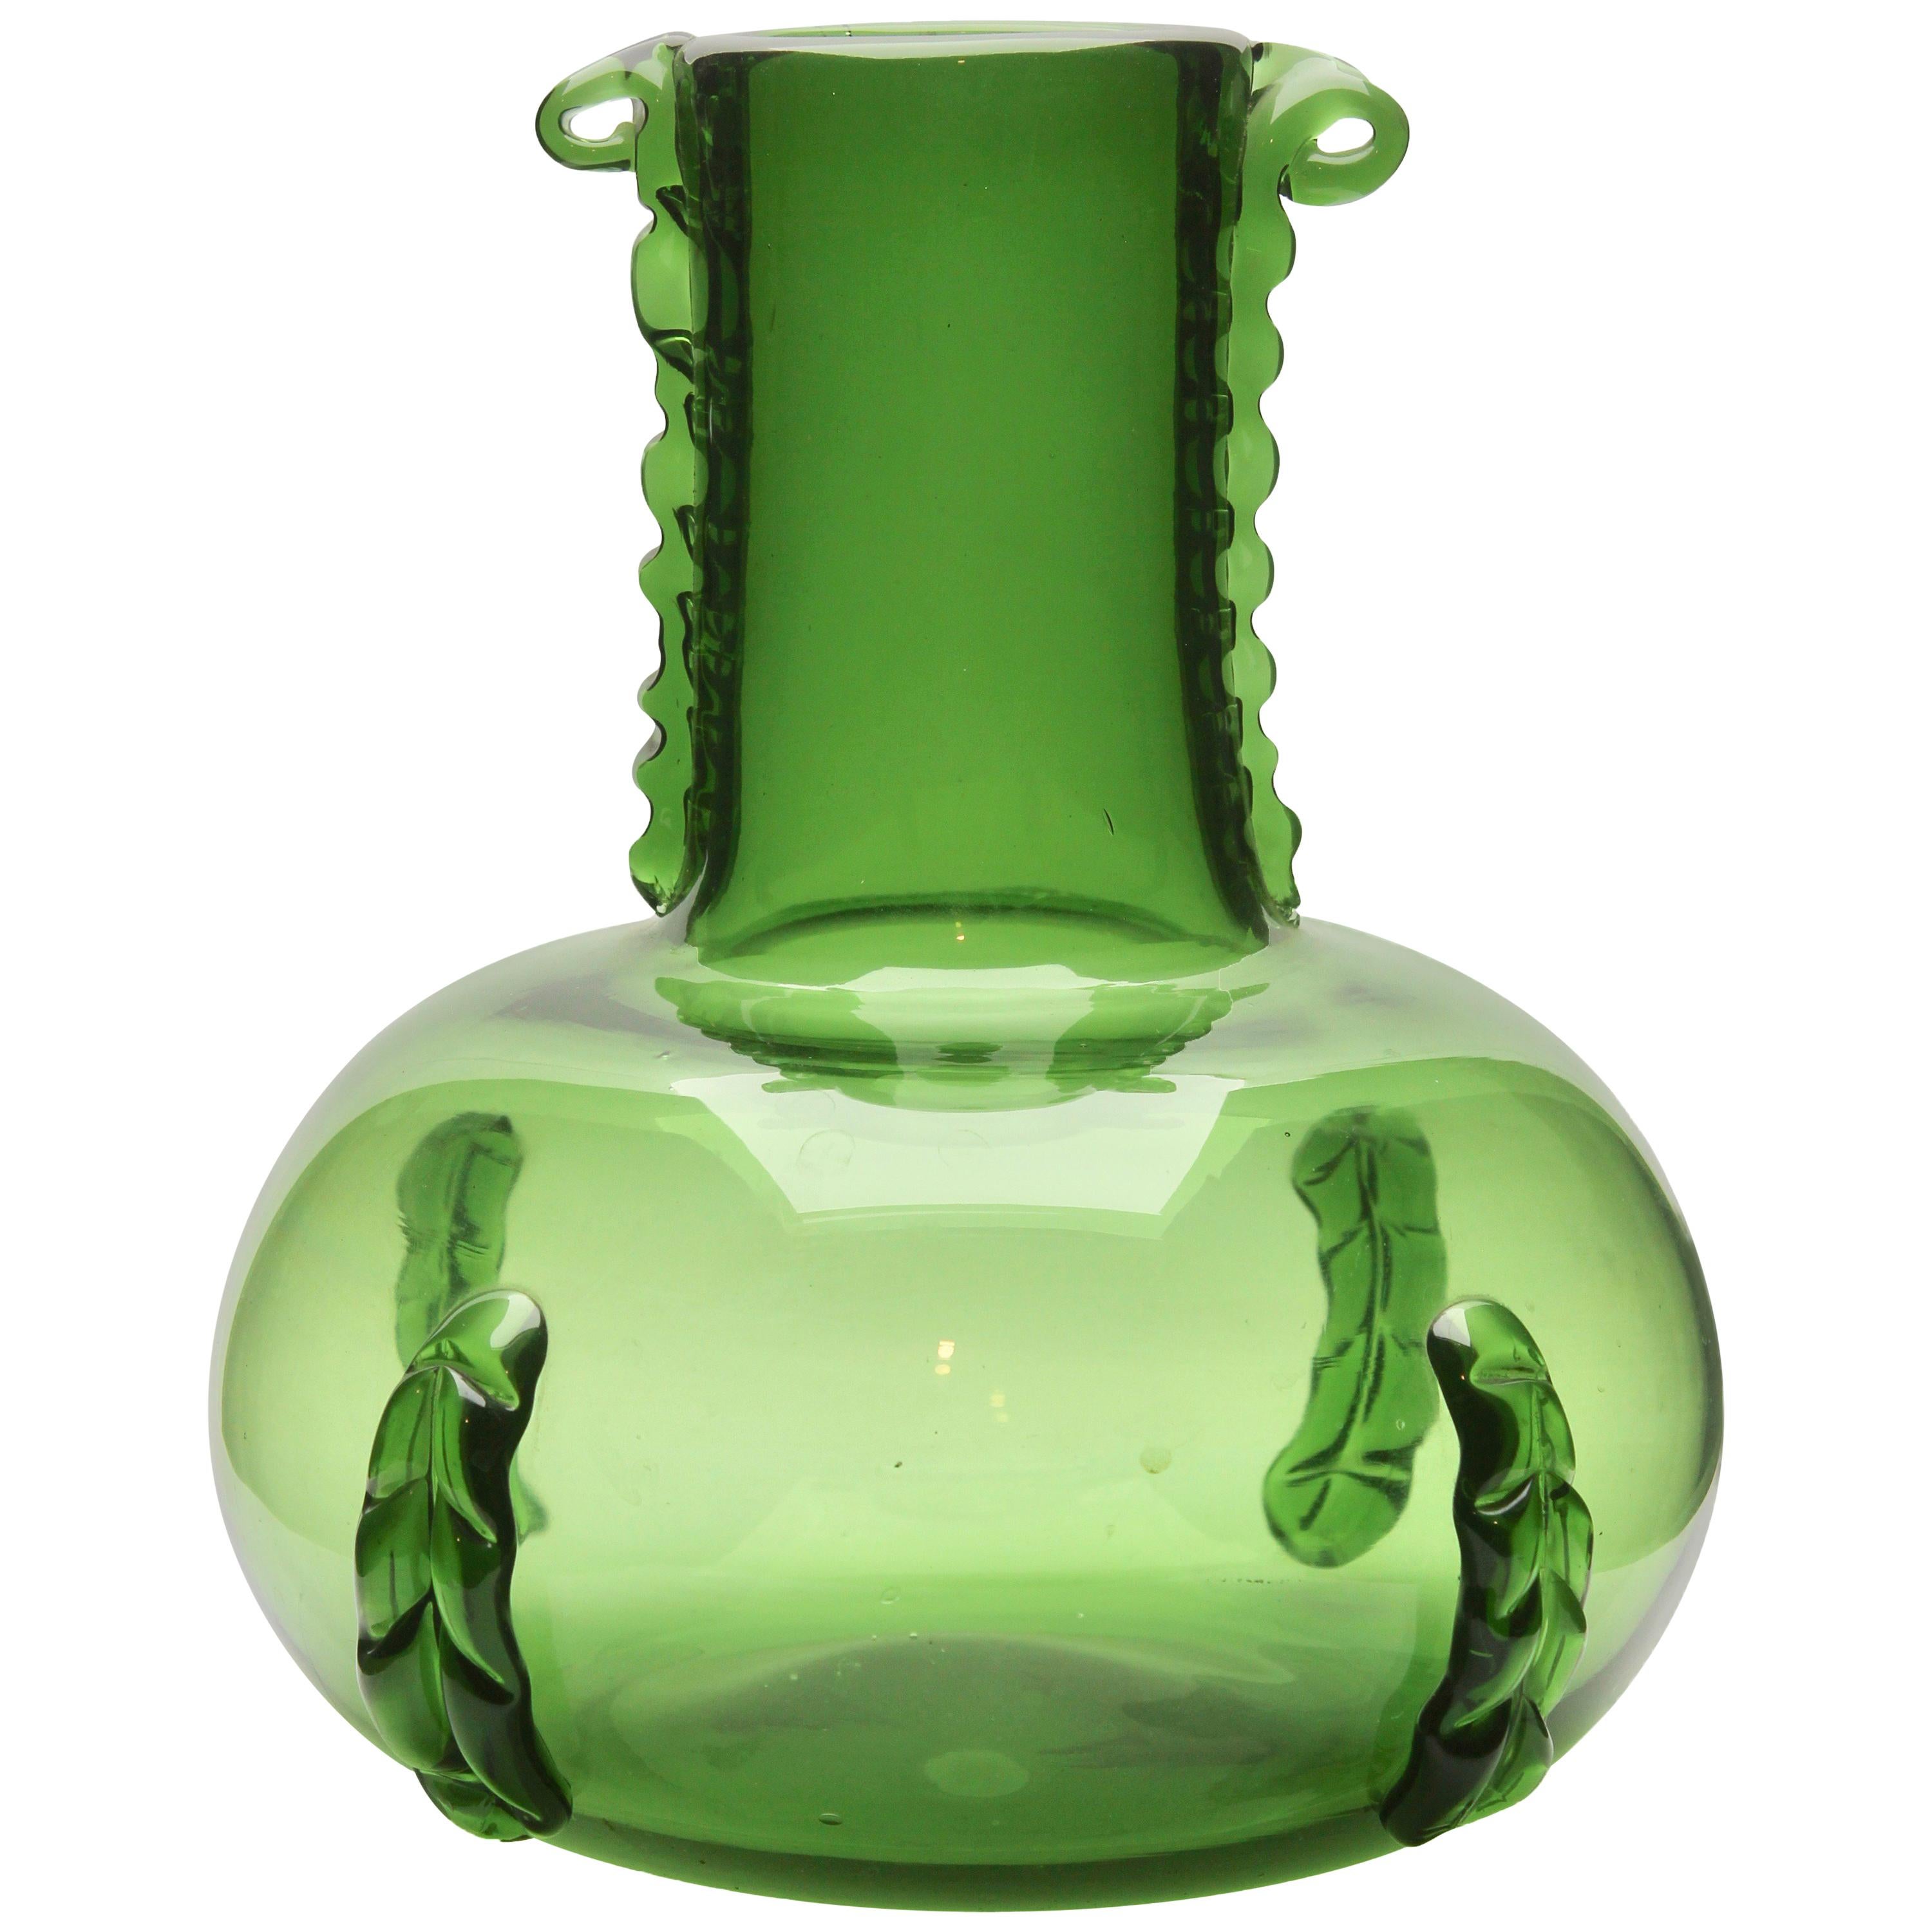 Made by the Italian craftsmen of Empoli, Florence

The carefully crafted details add flowing organic motifs, and act as a handle to ensure it can be safely carried.
The large, usable vase provides a solid pitcher form suitable for a few tall